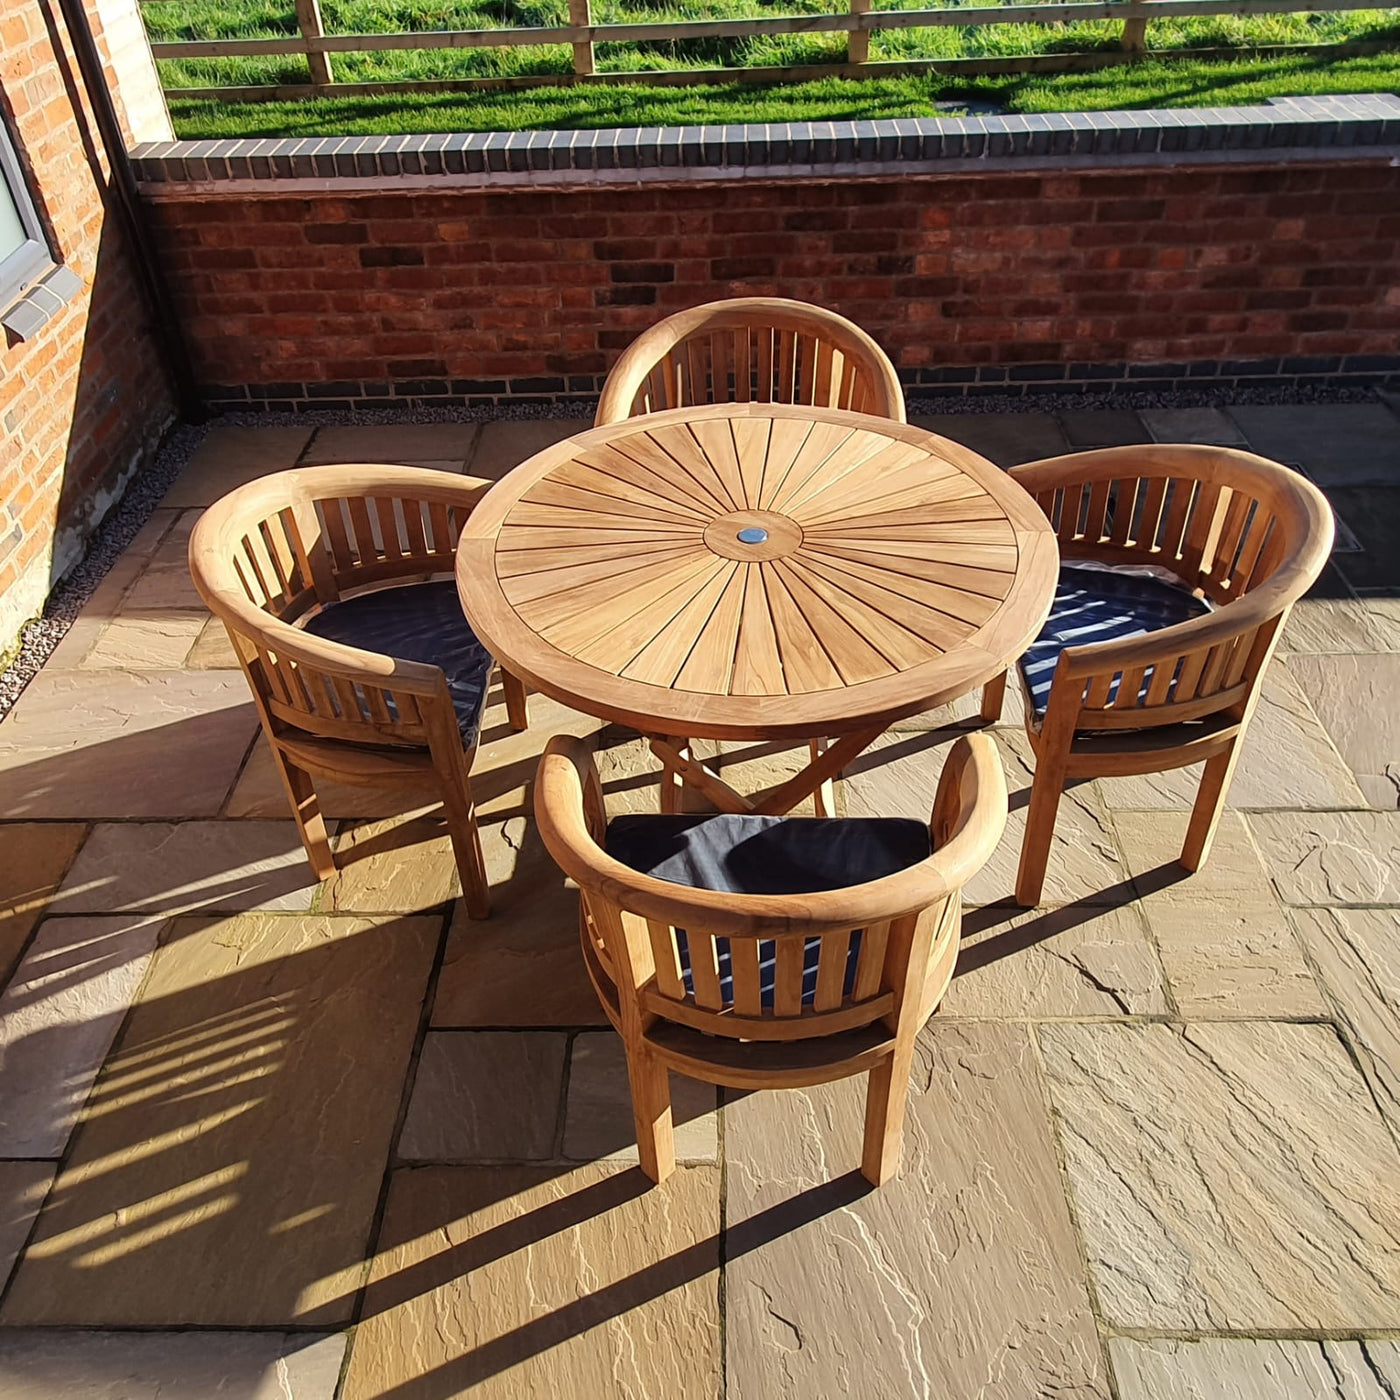 Teak 120cm Sunshine Set with 4 San Francisco Chairs includes a round table and four chairs on a paved patio, sunlight casting shadows, surrounded by a brick wall.